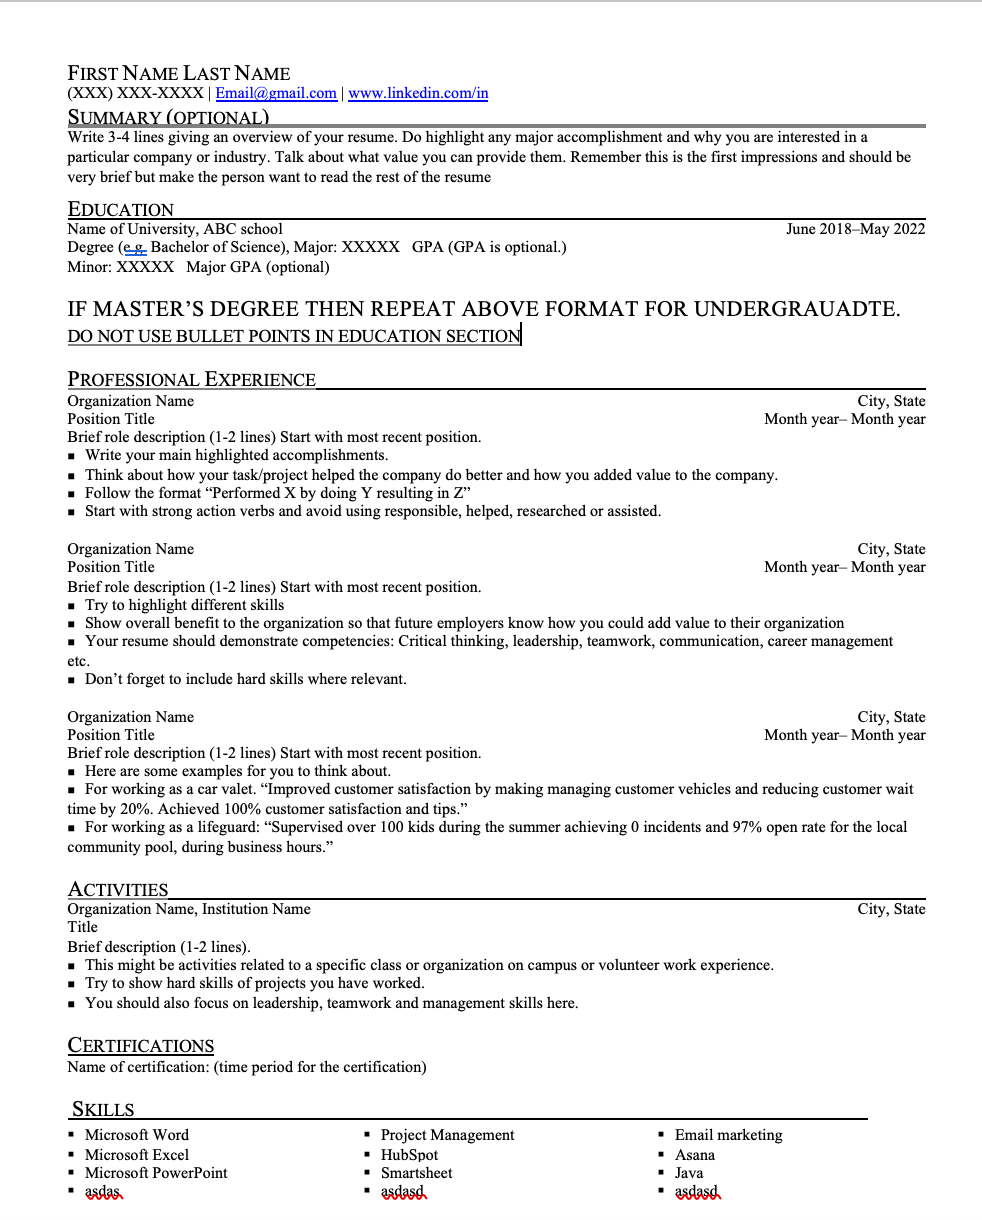 Should I Have A Two Column Resume?